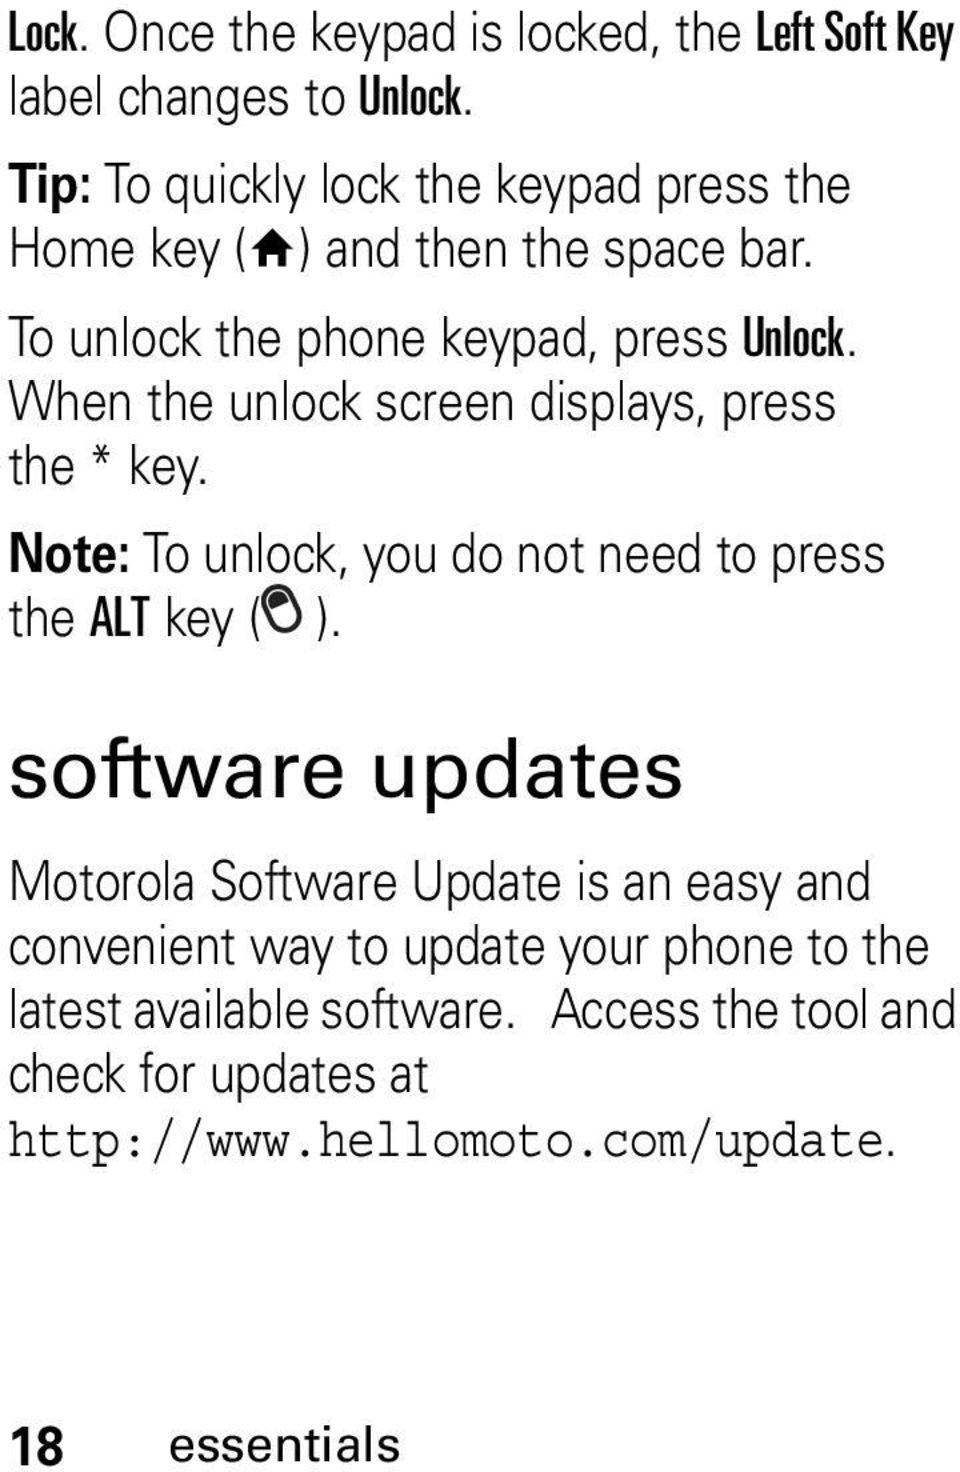 When the unlock screen displays, press the*key. Note: To unlock, you do not need to press the ALT key ( ).